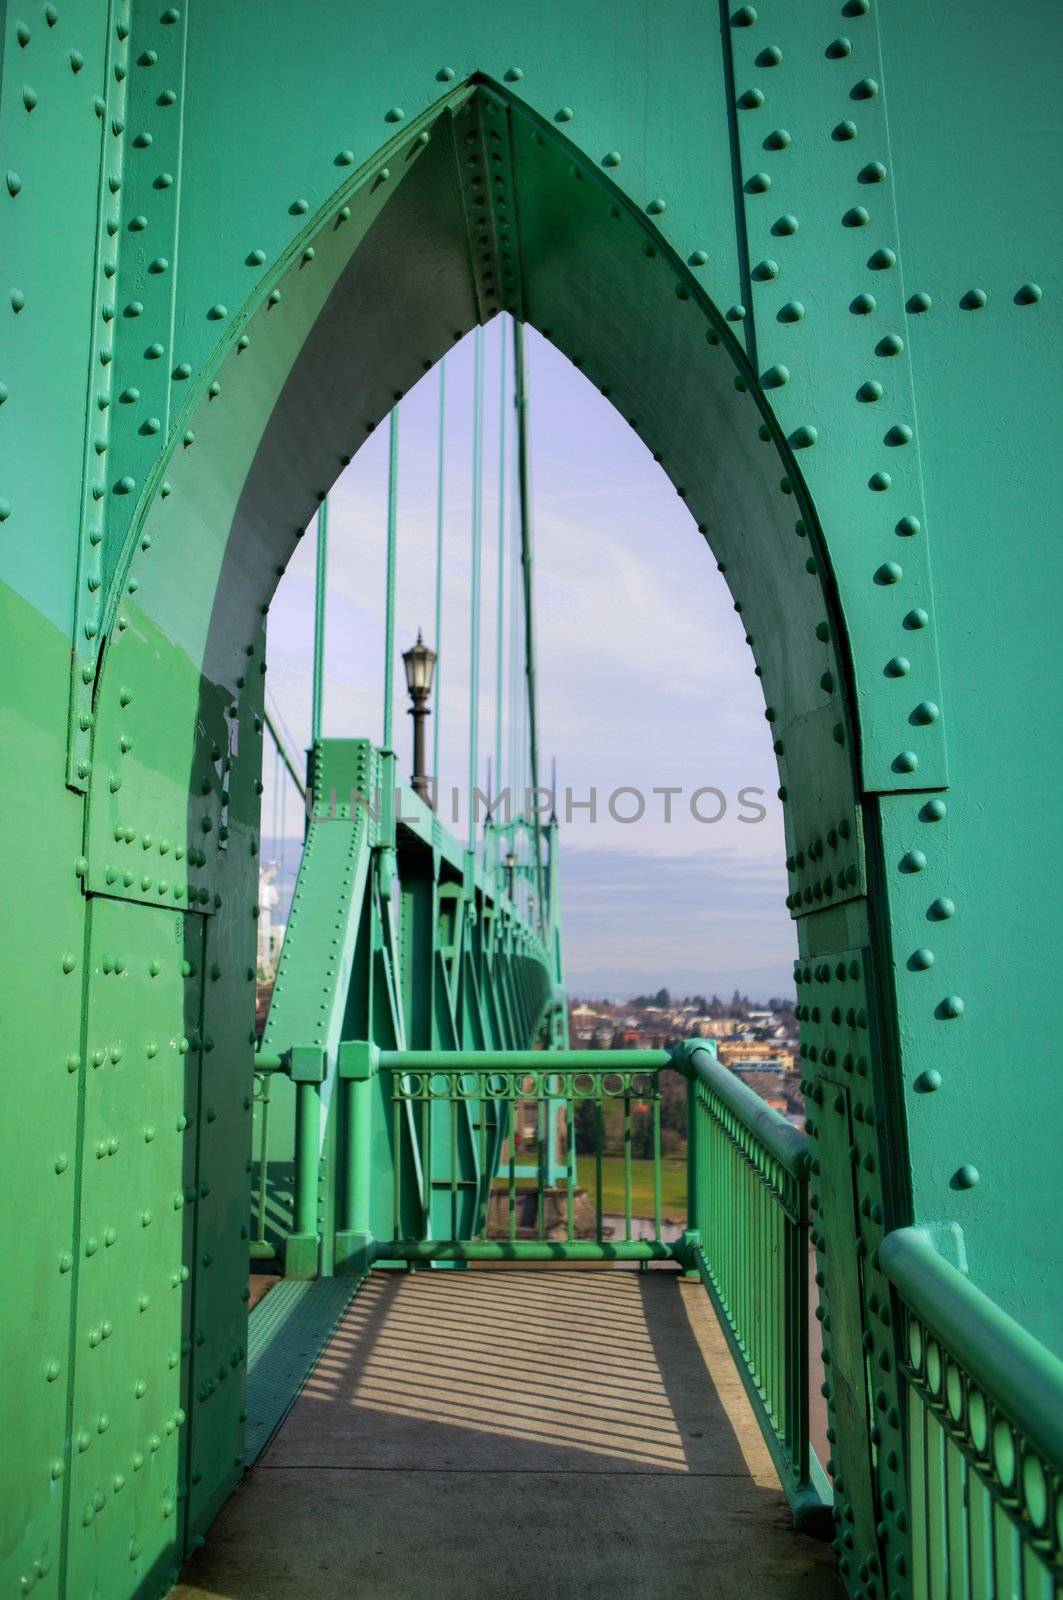 Subtle HDR image of dramatic pointed arch passage on St. Johns Bridge in Portland, OR